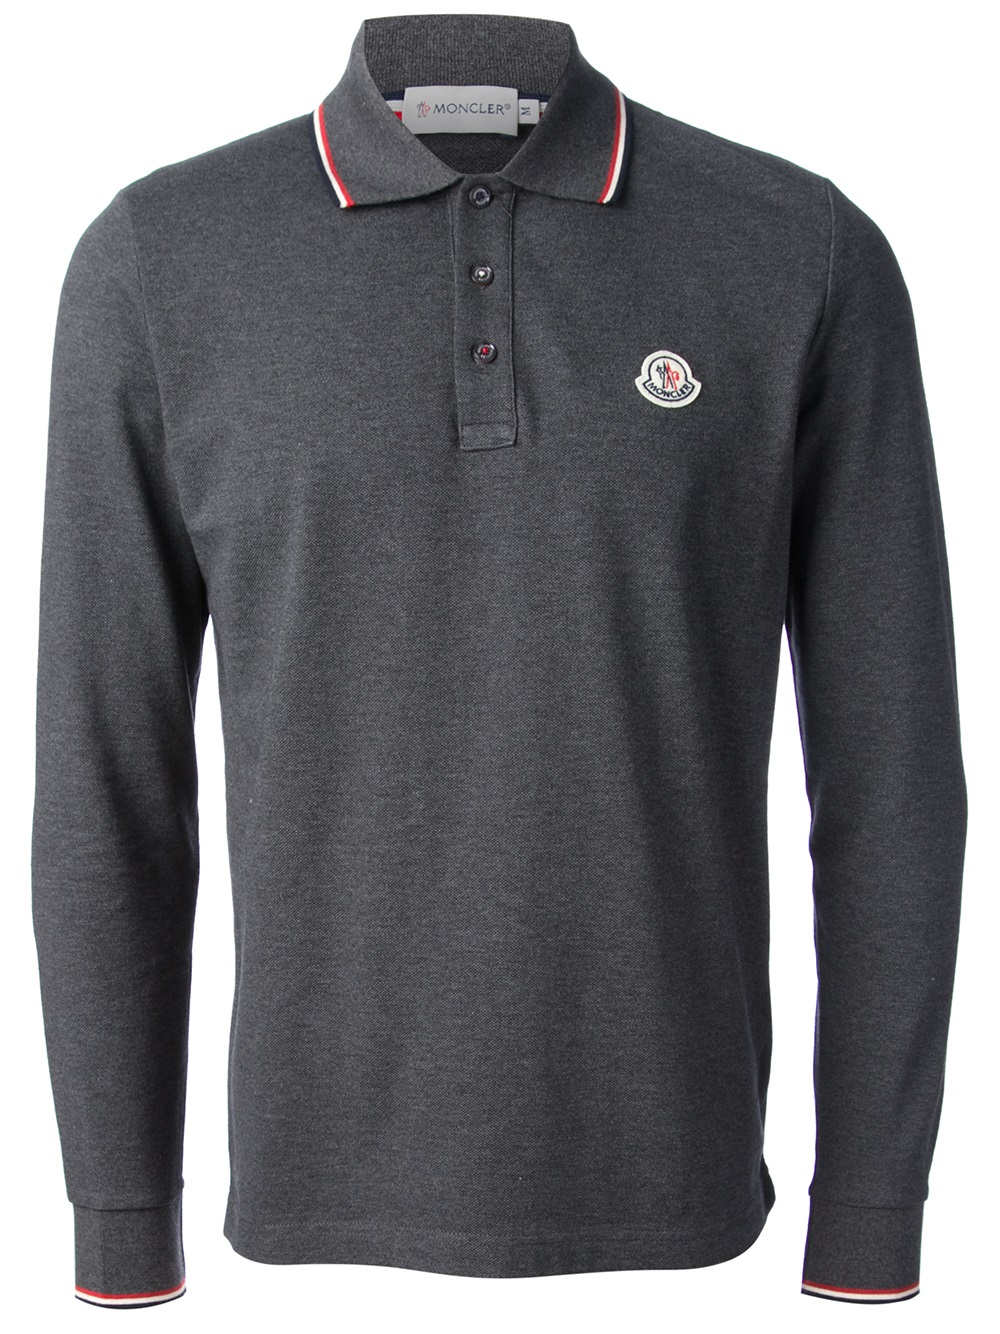 Moncler Long Sleeved Polo Shirt in Grey (Gray) for Men - Lyst